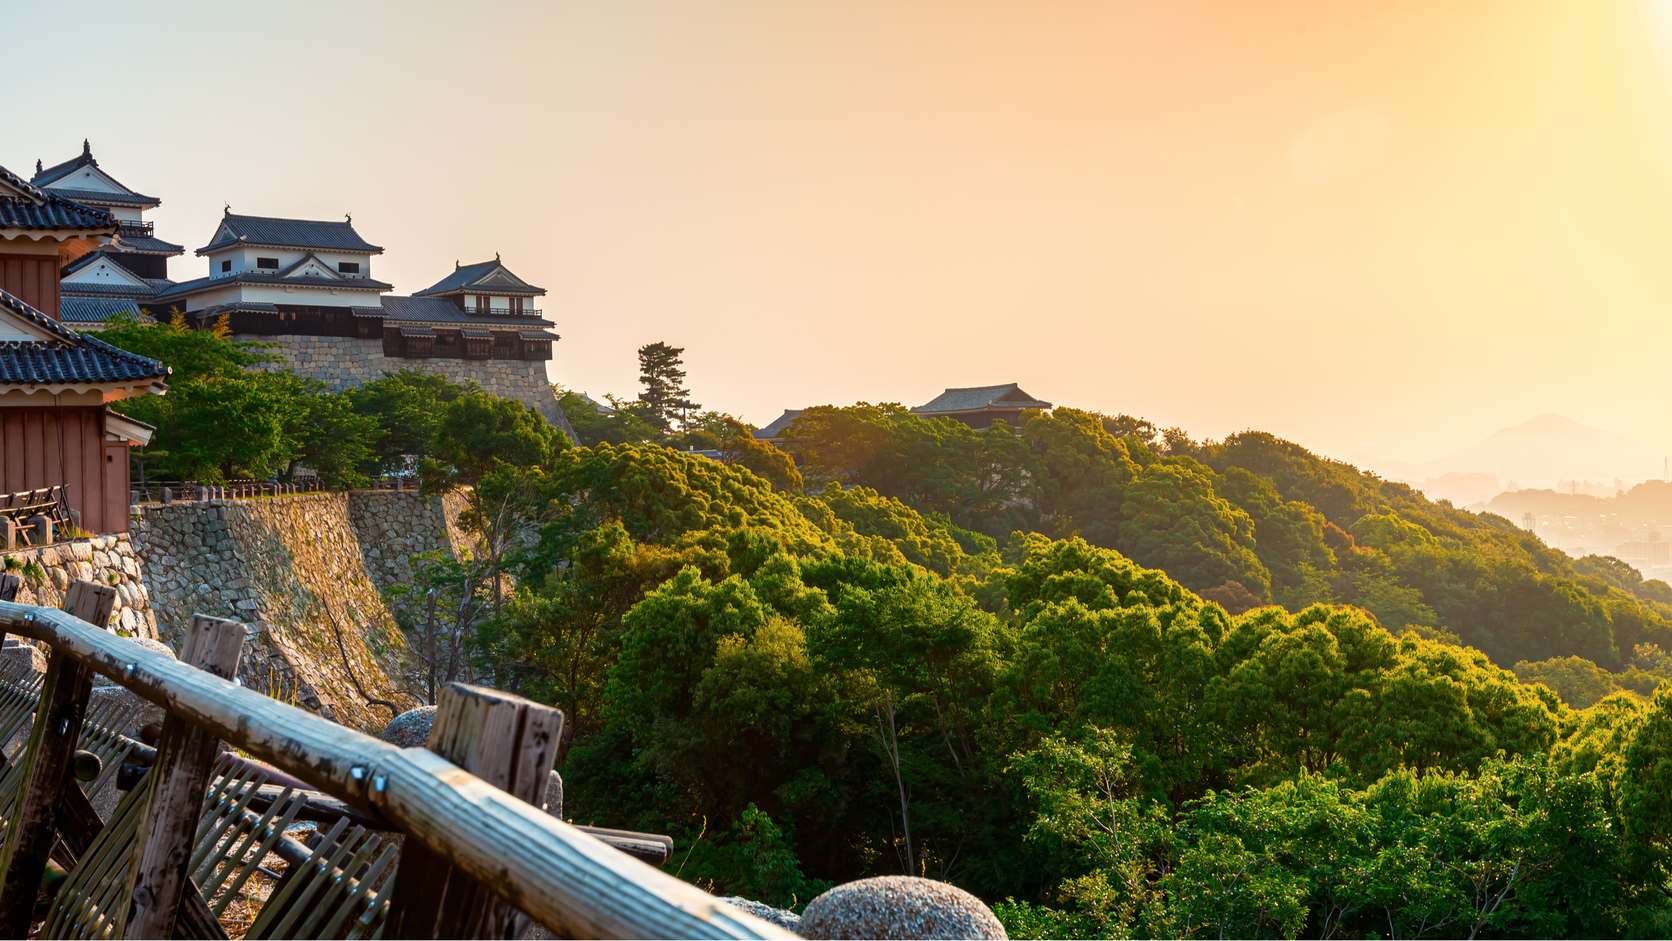 Ehime: The jewel of the Inland Sea